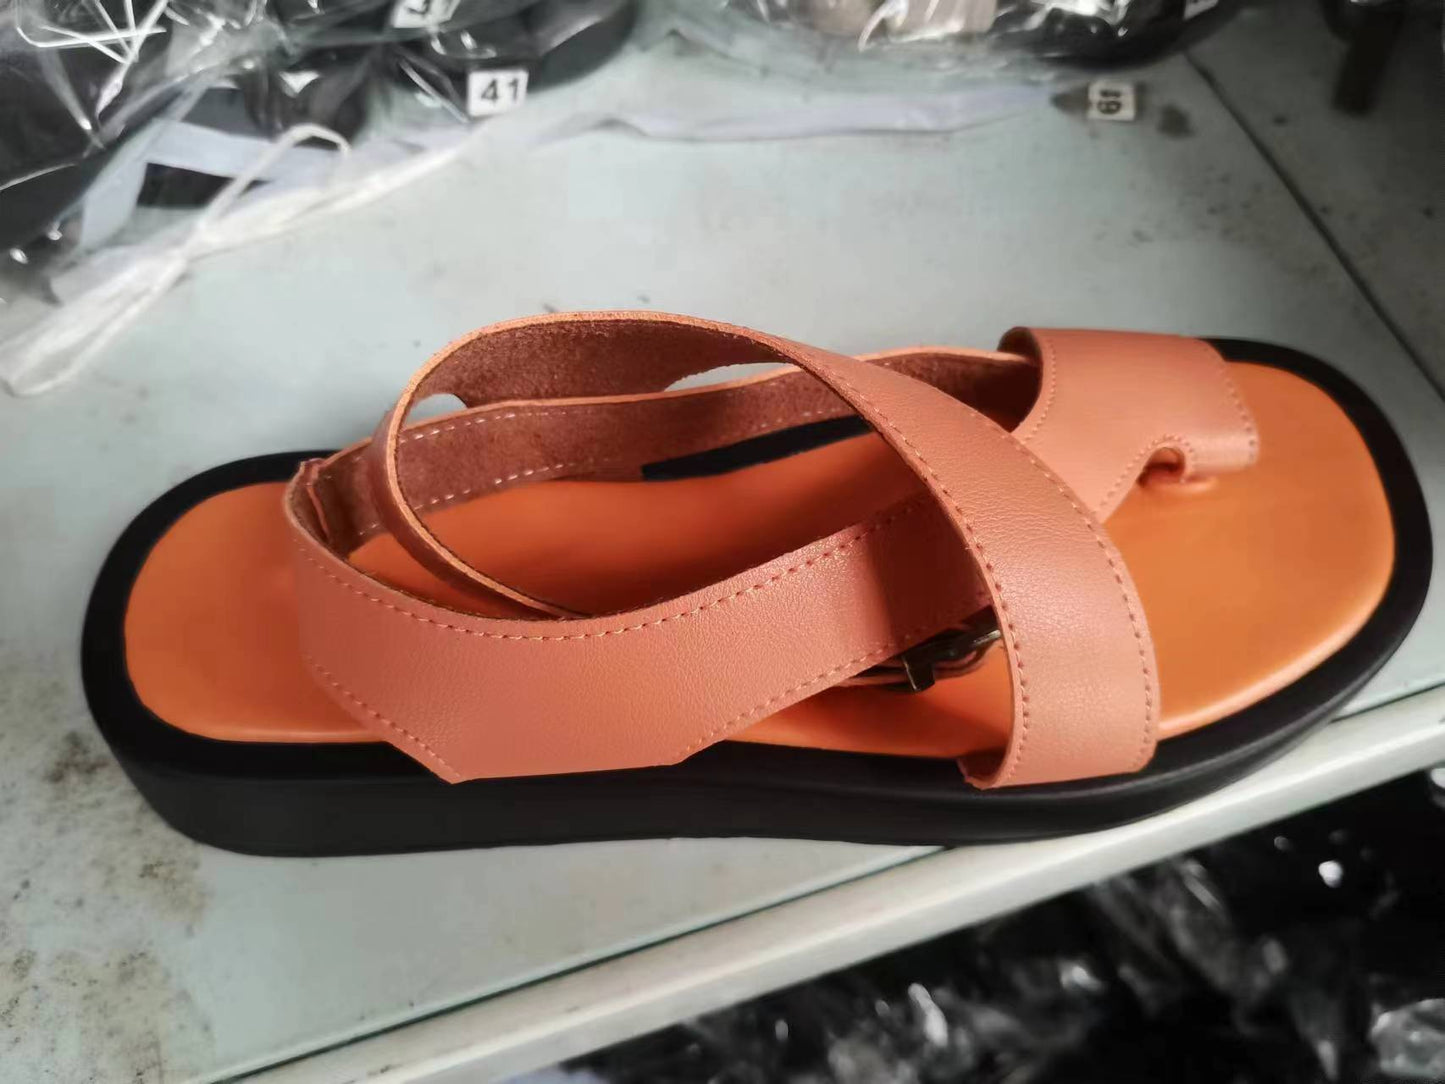 Women's Casual Thick-Soled Clip Toe Sandals Beach Shoes with Round Toe and Back Buckle Strap